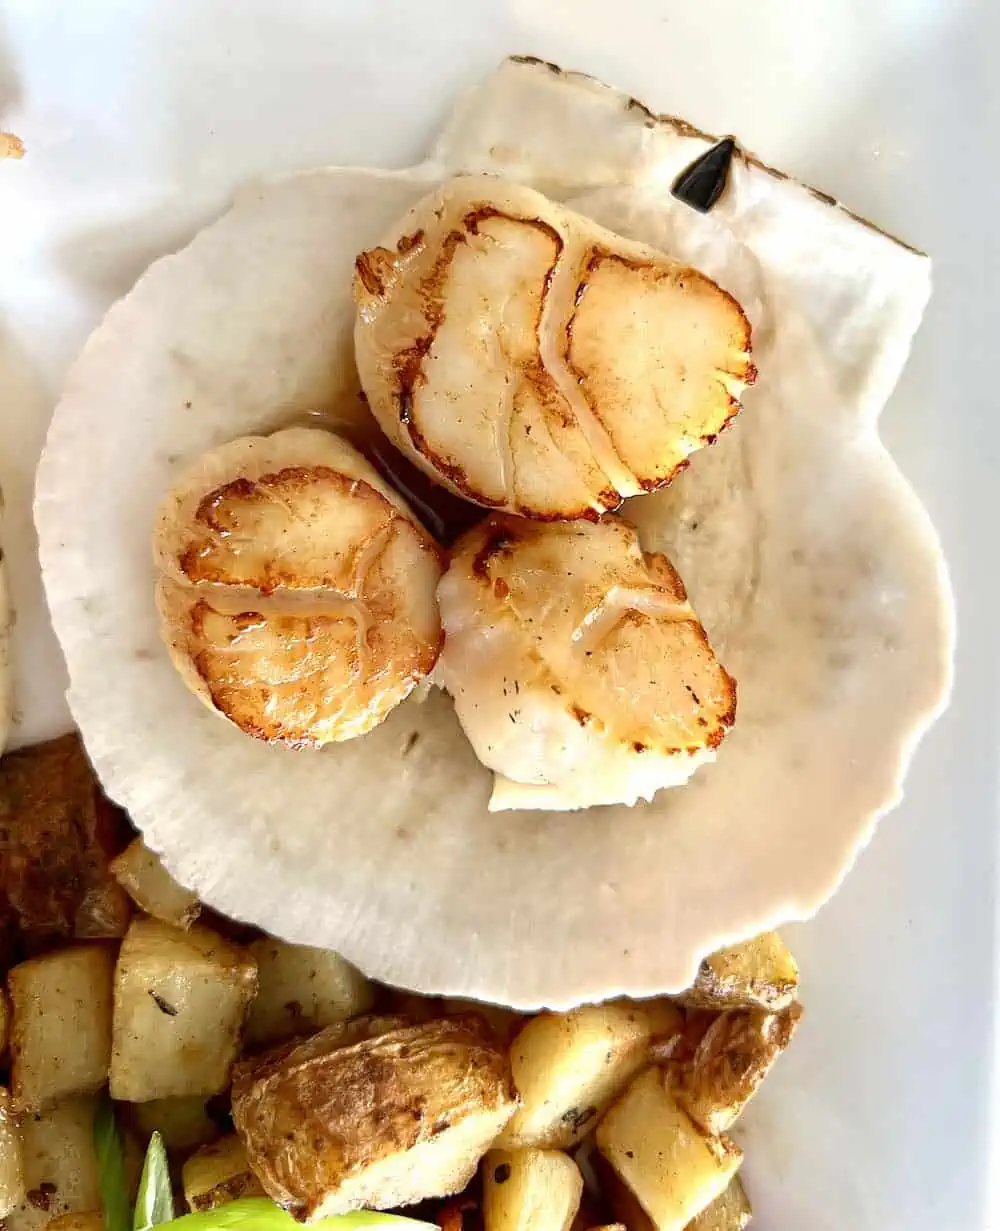 A Digby breakfast featuring scallops sauteed in butter on a half shell. 